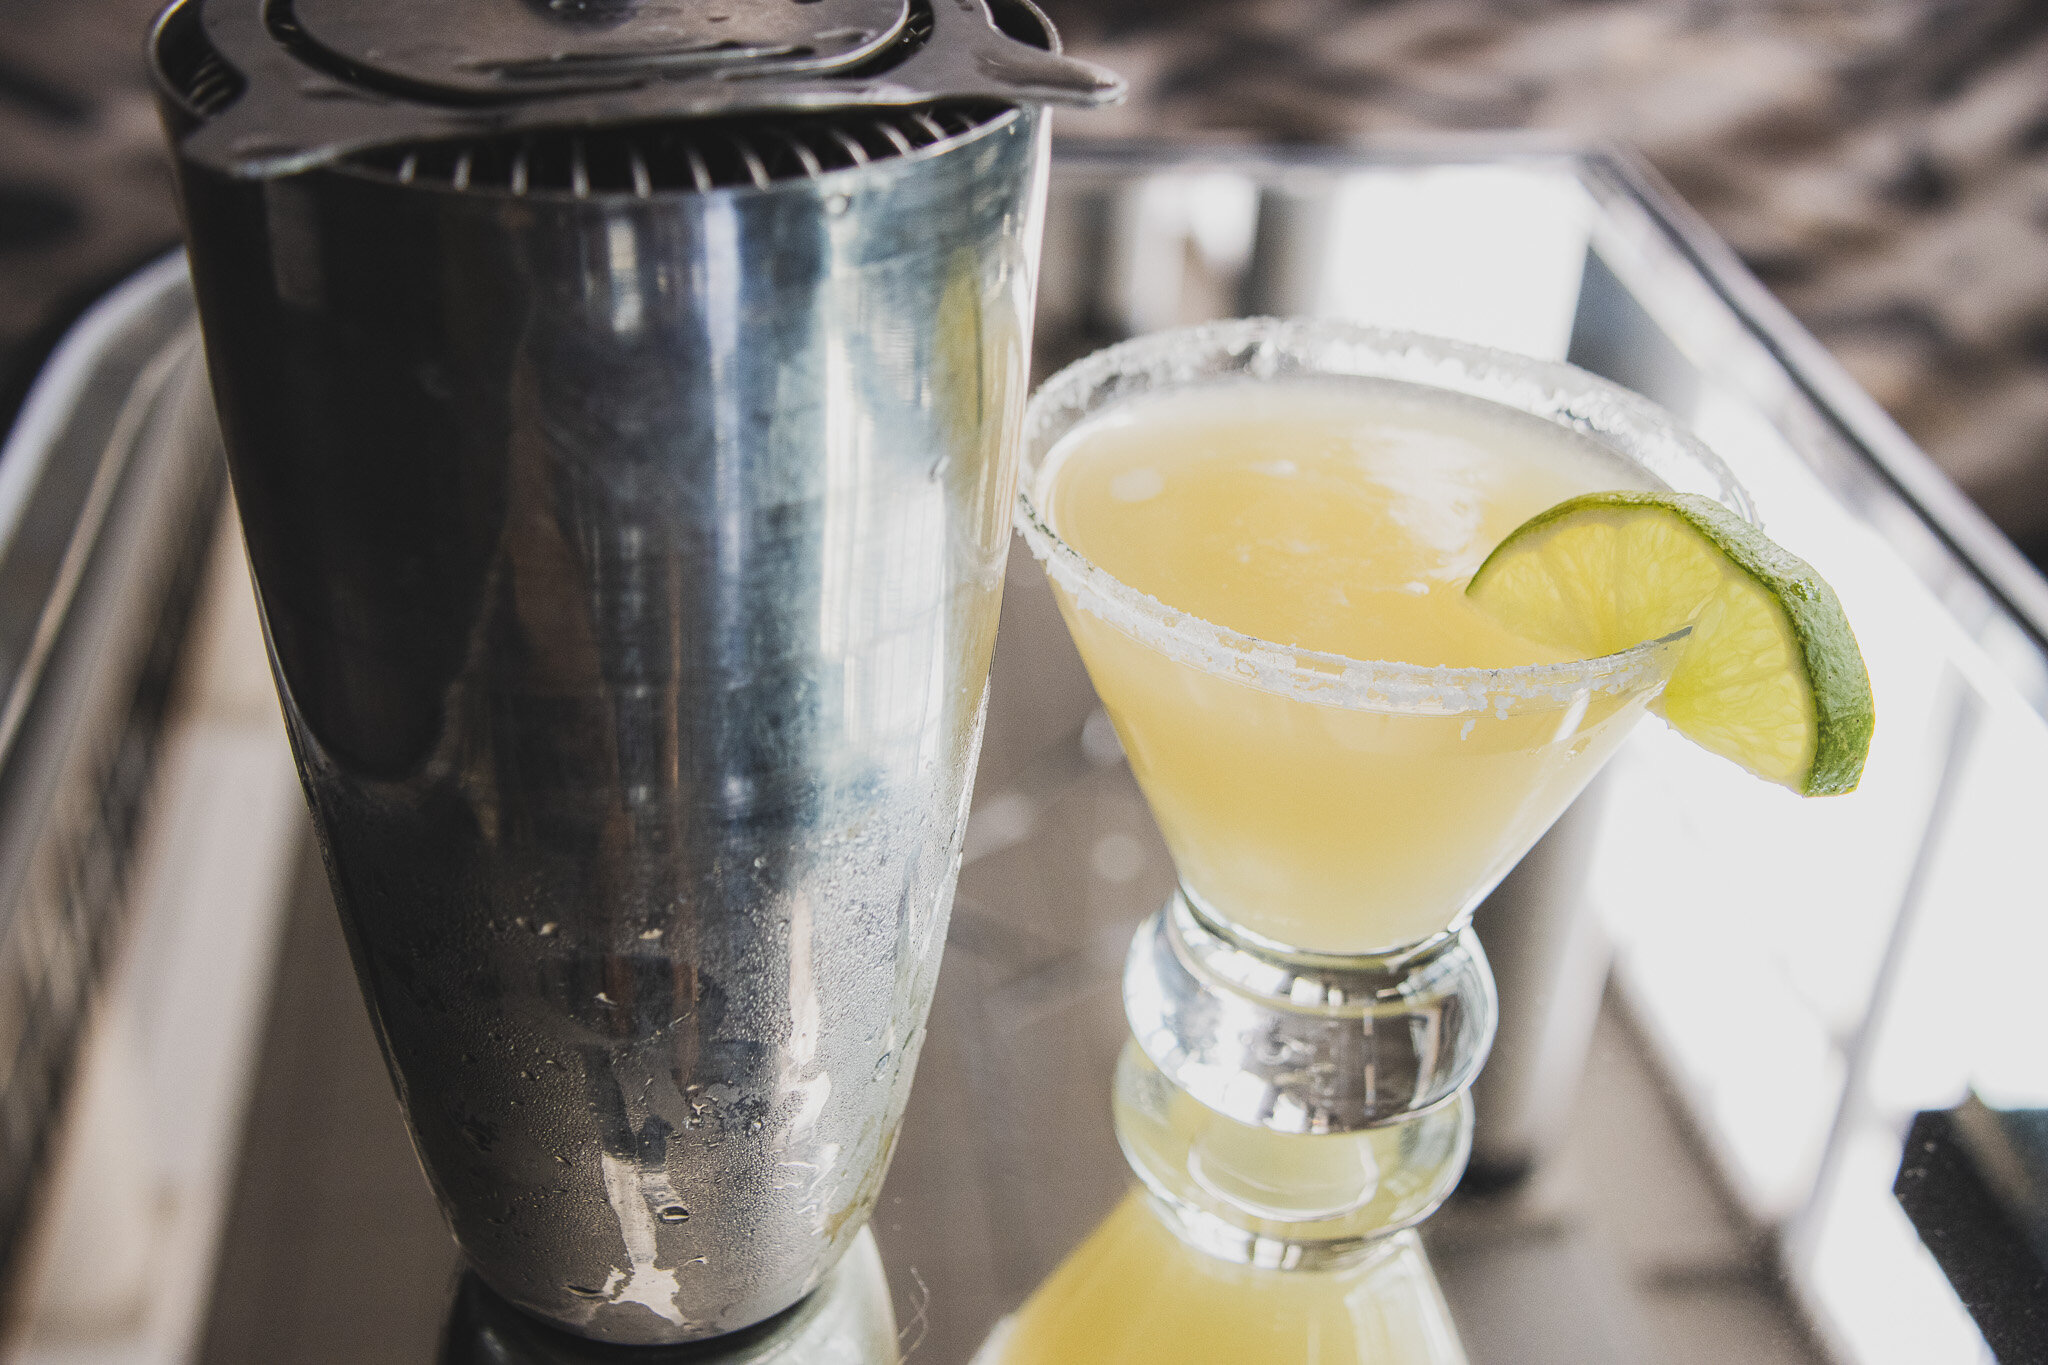 Happy Cinco de Mayo!!!
Celebrate with our Astor Margarita - 
Casamigos Tequila Blanco, lime Grand Marnier, served in
a salted glass with the shaker